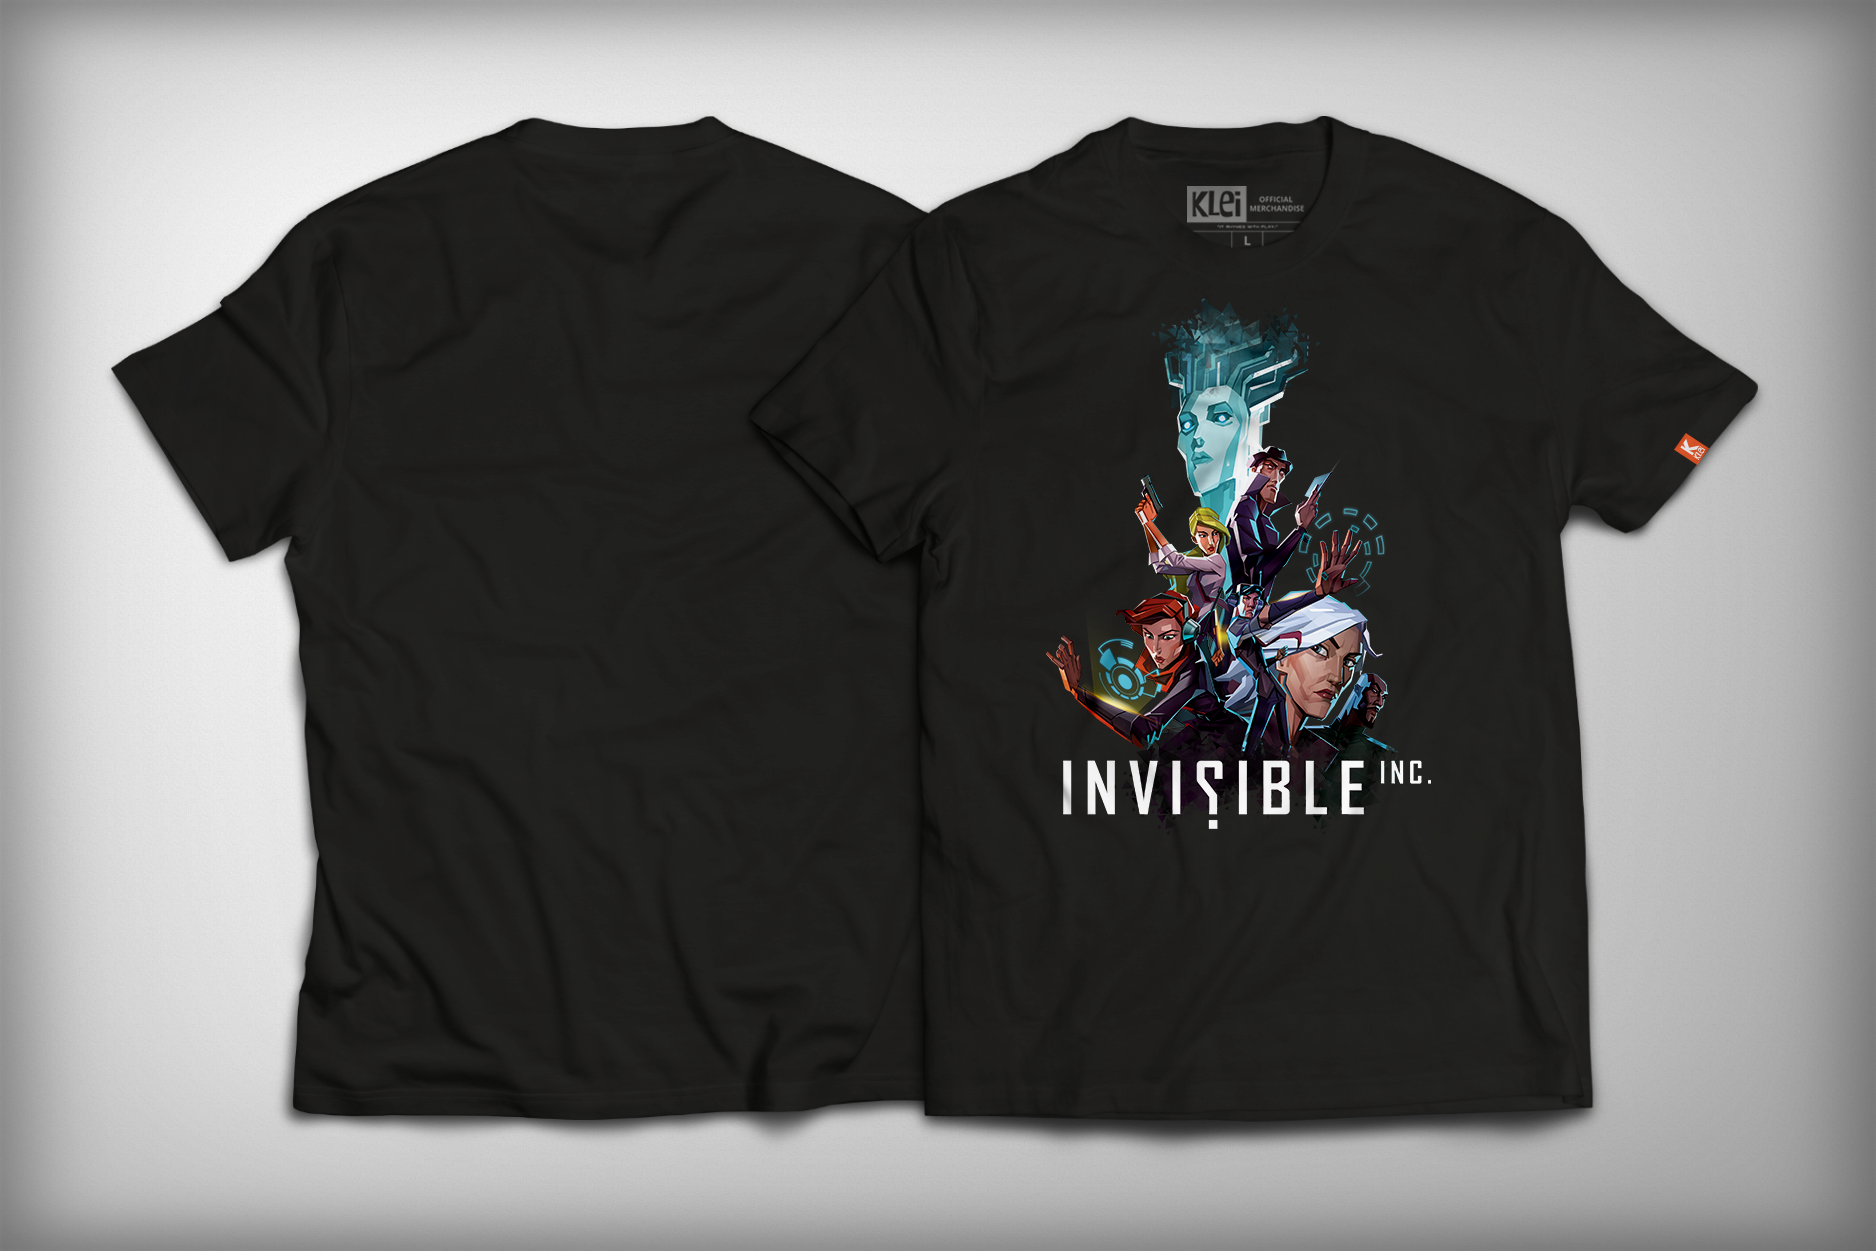 Invisible Inc. Shirt Front and Back